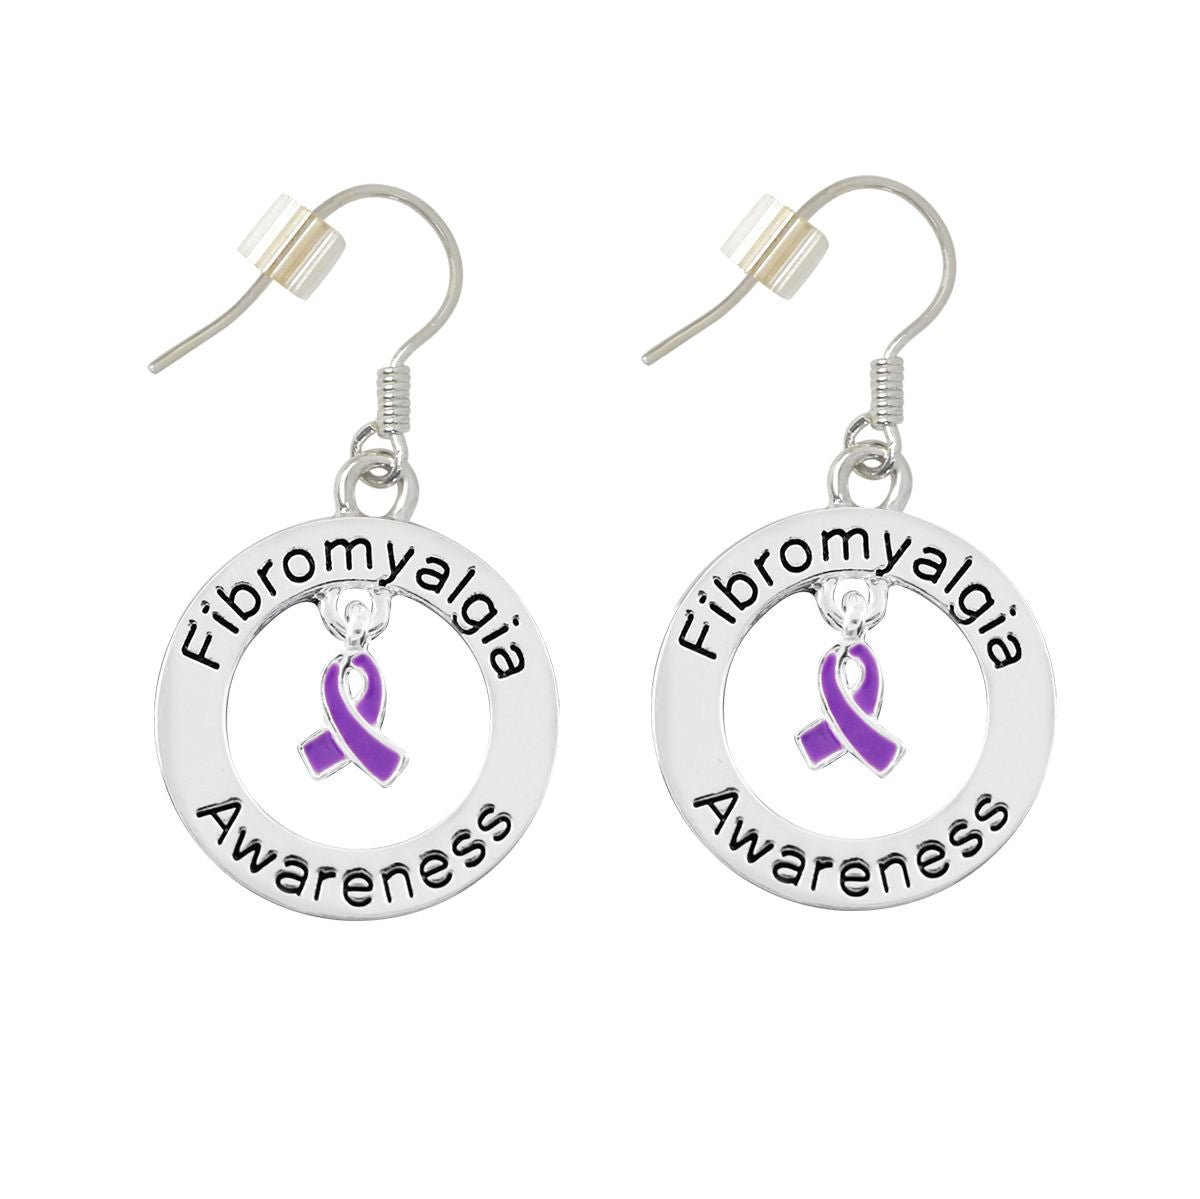 Fibromyalgia Awareness Hanging Earrings - Fundraising For A Cause